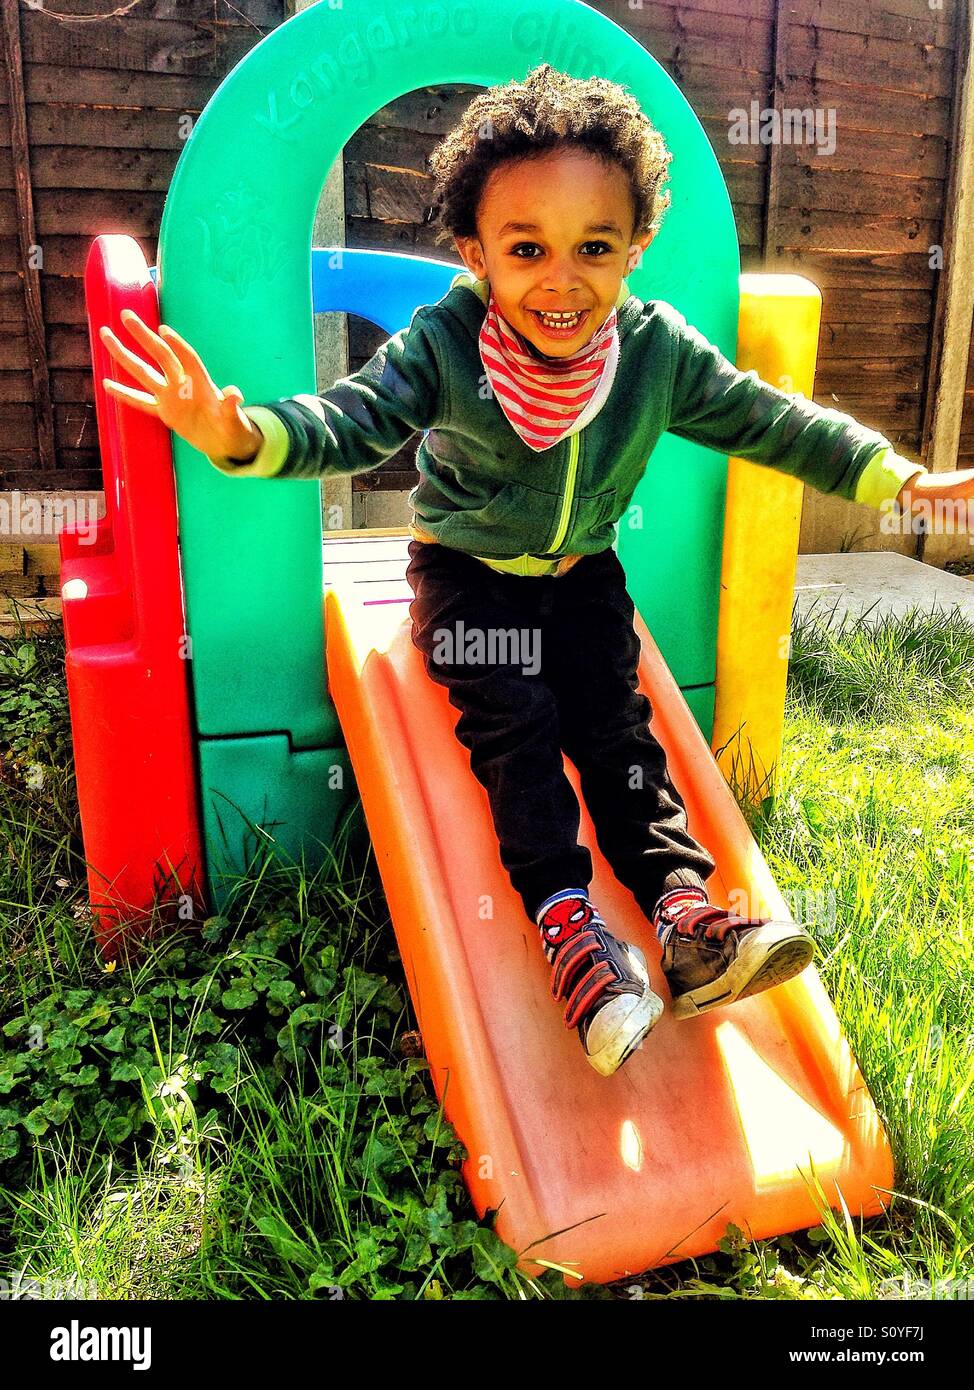 Boy playing on a slide. Stock Photo